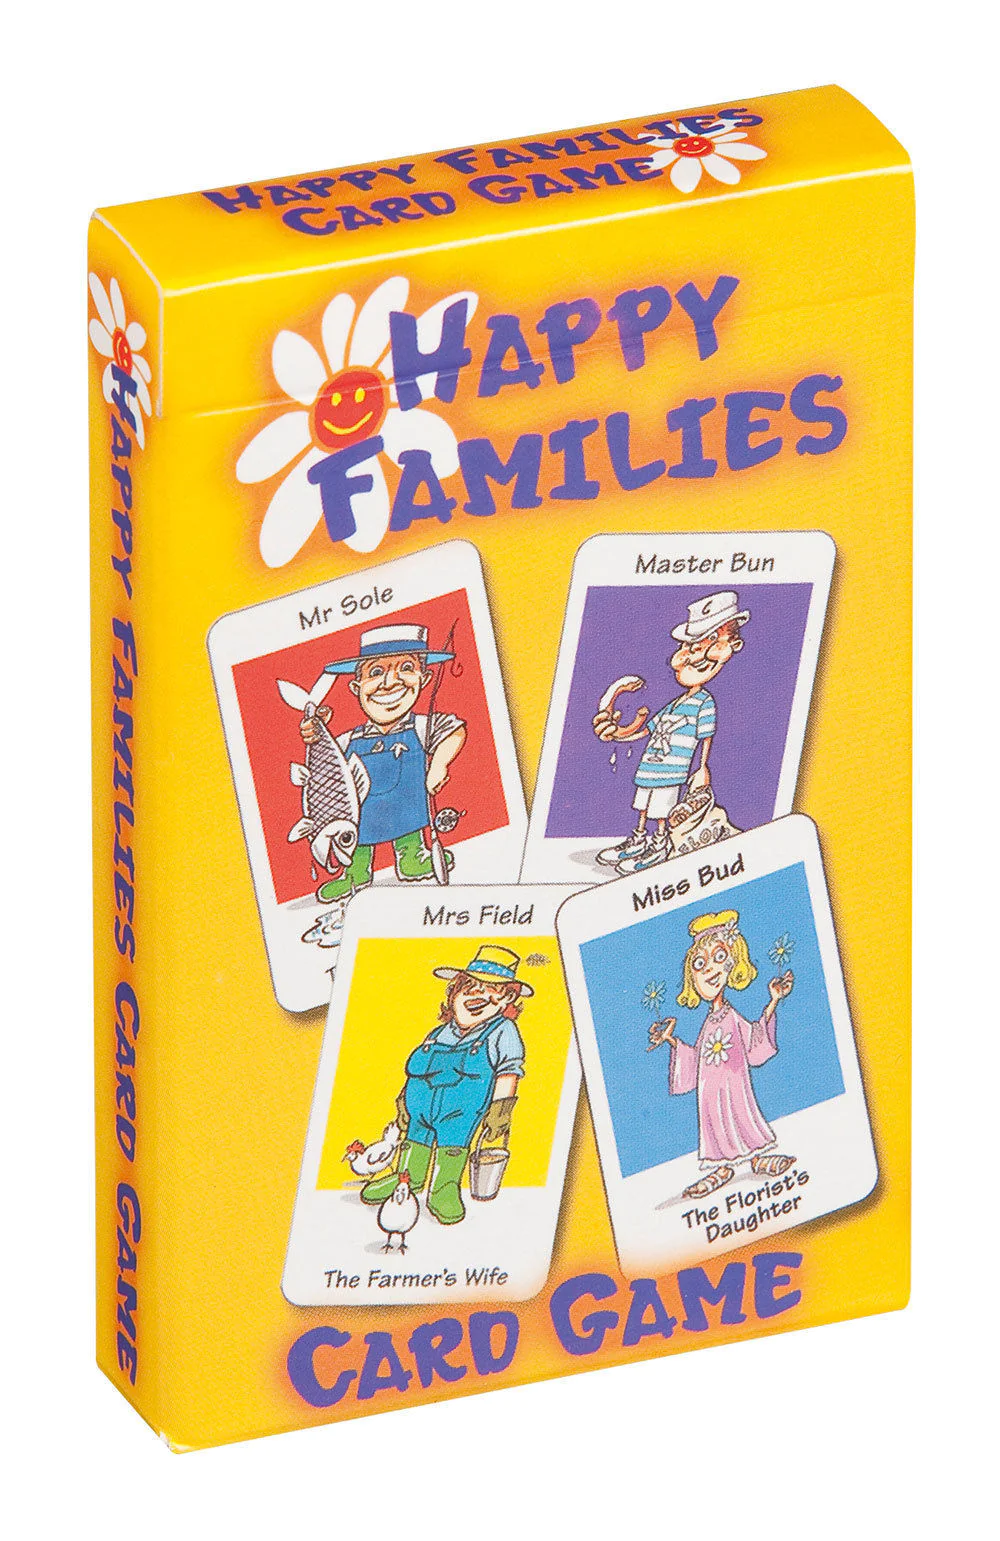 1pc 'skyjo Card Game' Family Get-together Fun Game Card, Party Board Games,  The Fun And Exciting Card Game For Kids And Adults - Play With Friends And  Family